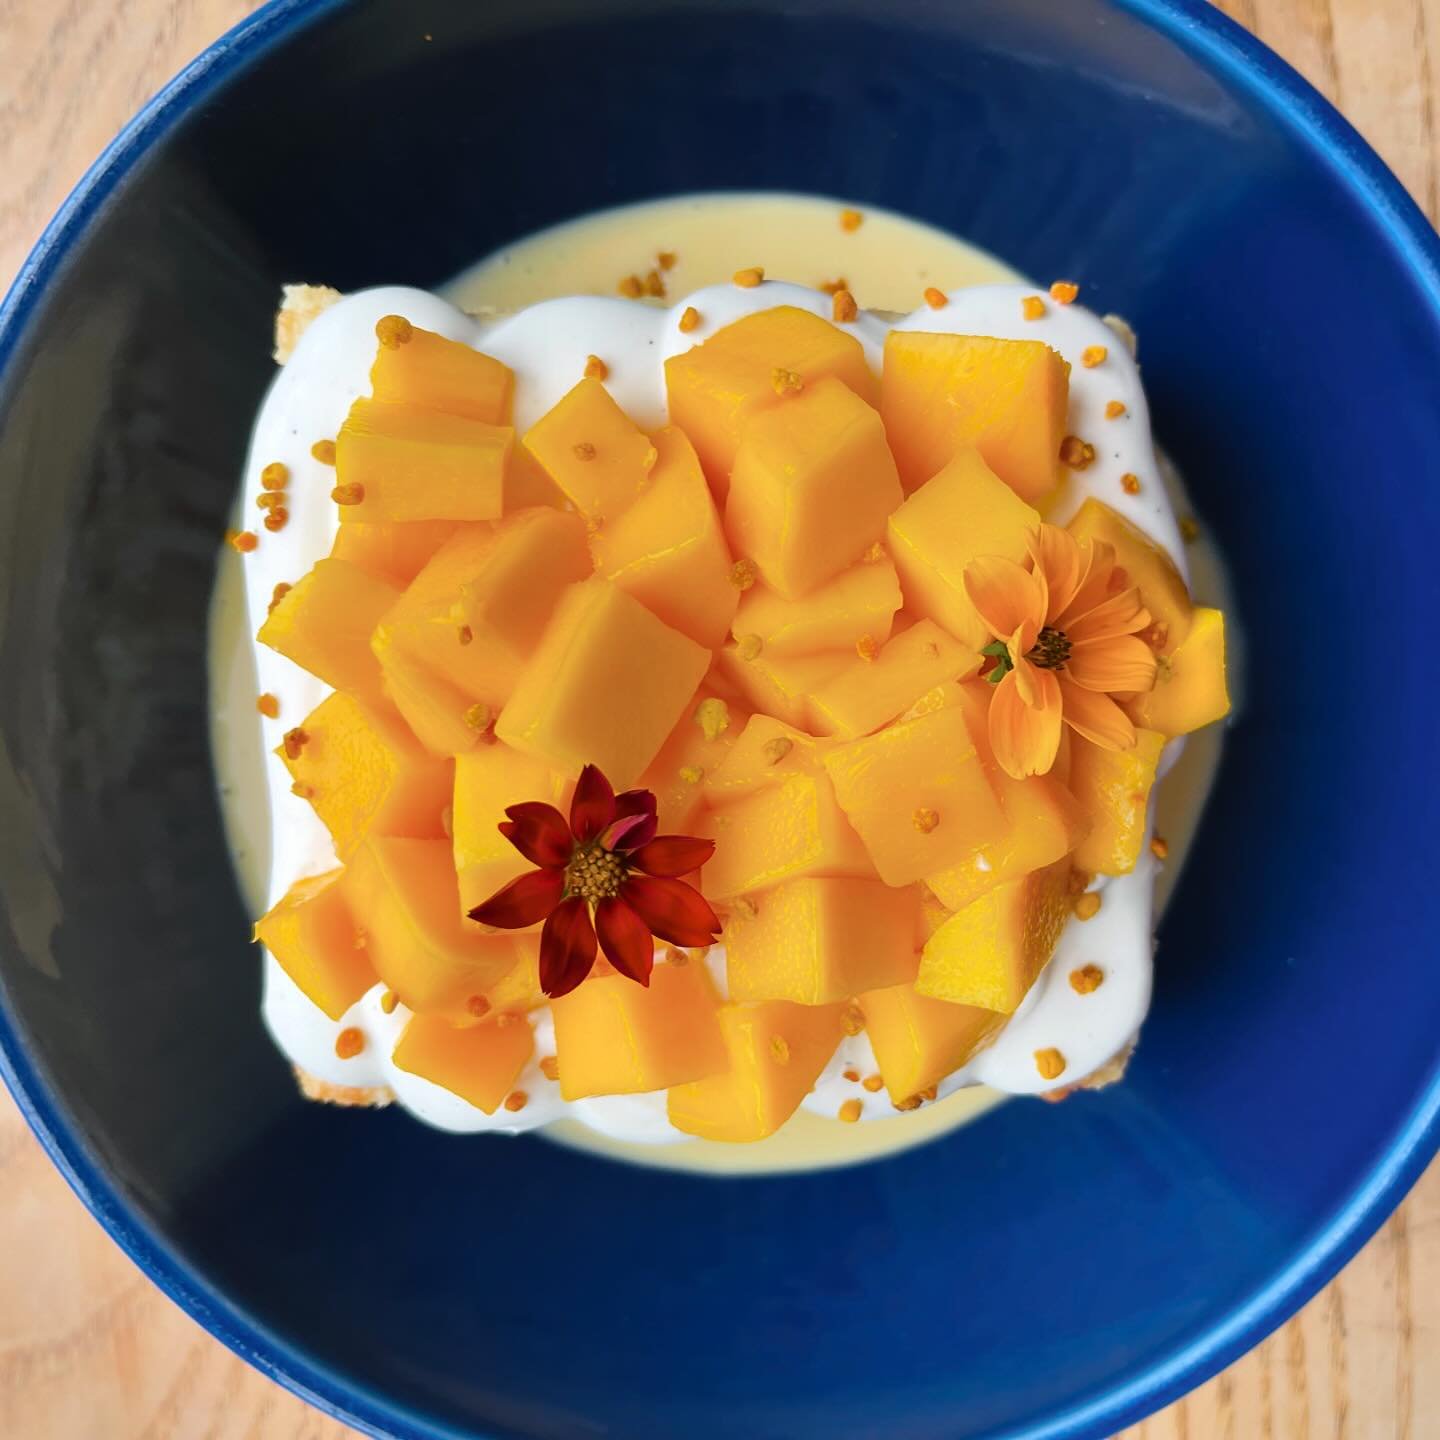 we&rsquo;ve got SWEETS made extra special for Cinco de Mayo weekend &mdash; right now!!

Choco-Flan! w/ coffee cream! @hootie57&rsquo;s favorite! 🍮

Tres leches cake w/ Ataulfo mangoes &amp; labneh whip 🥭

@saam.robinson speaking to @jfiguer1&rsquo